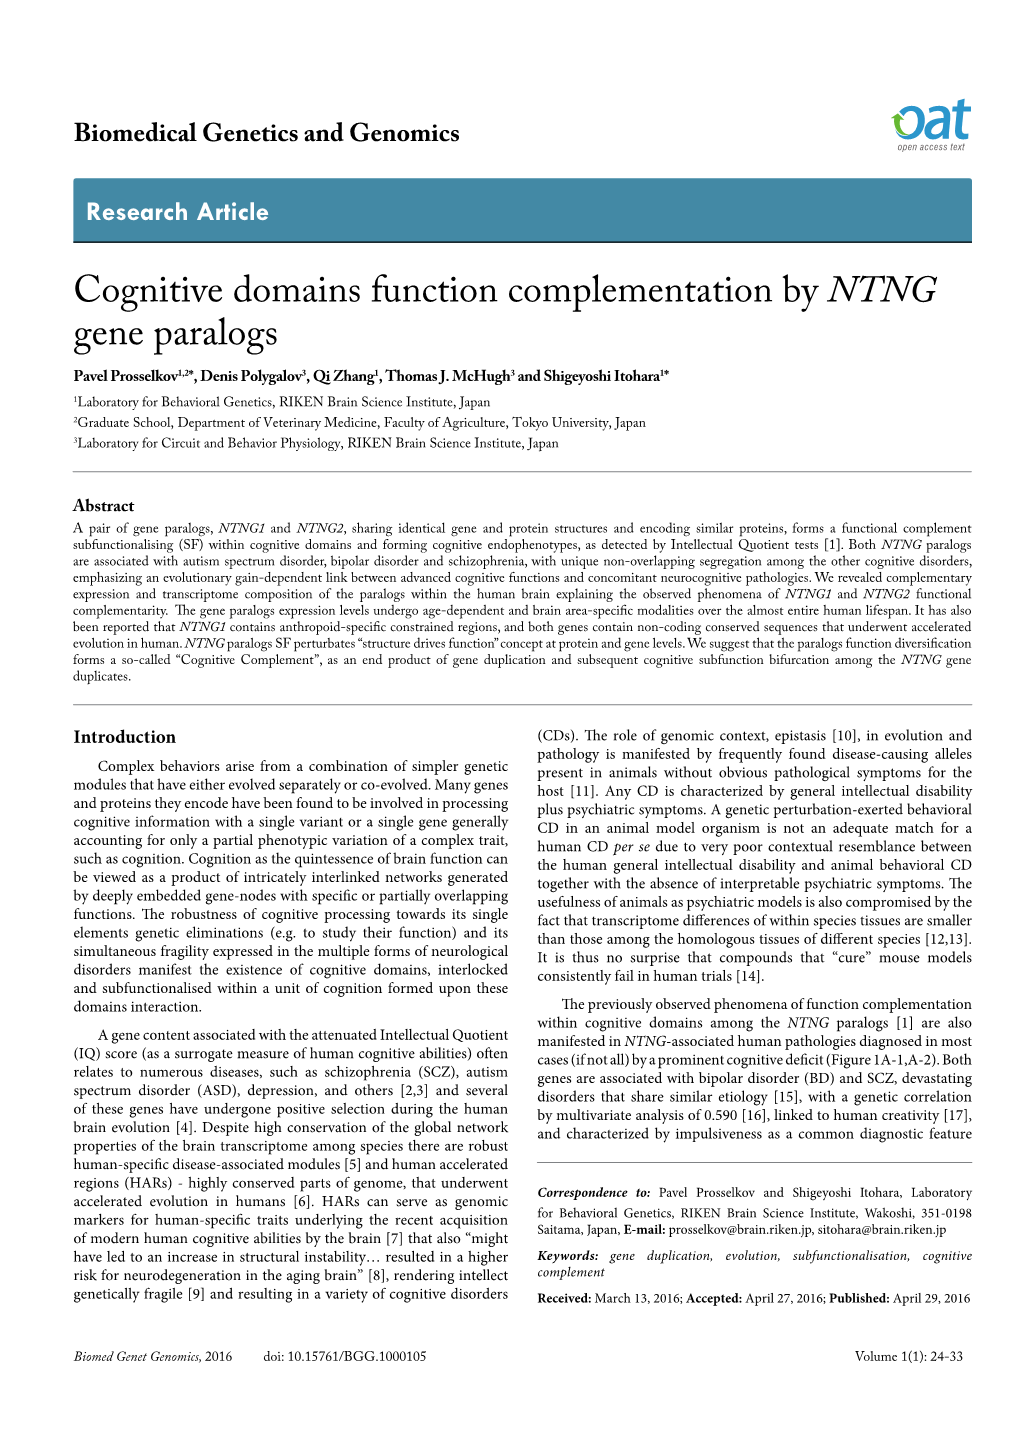 Cognitive Domains Function Complementation by NTNG Gene Paralogs Pavel Prosselkov1,2*, Denis Polygalov3, Qi Zhang1, Thomas J